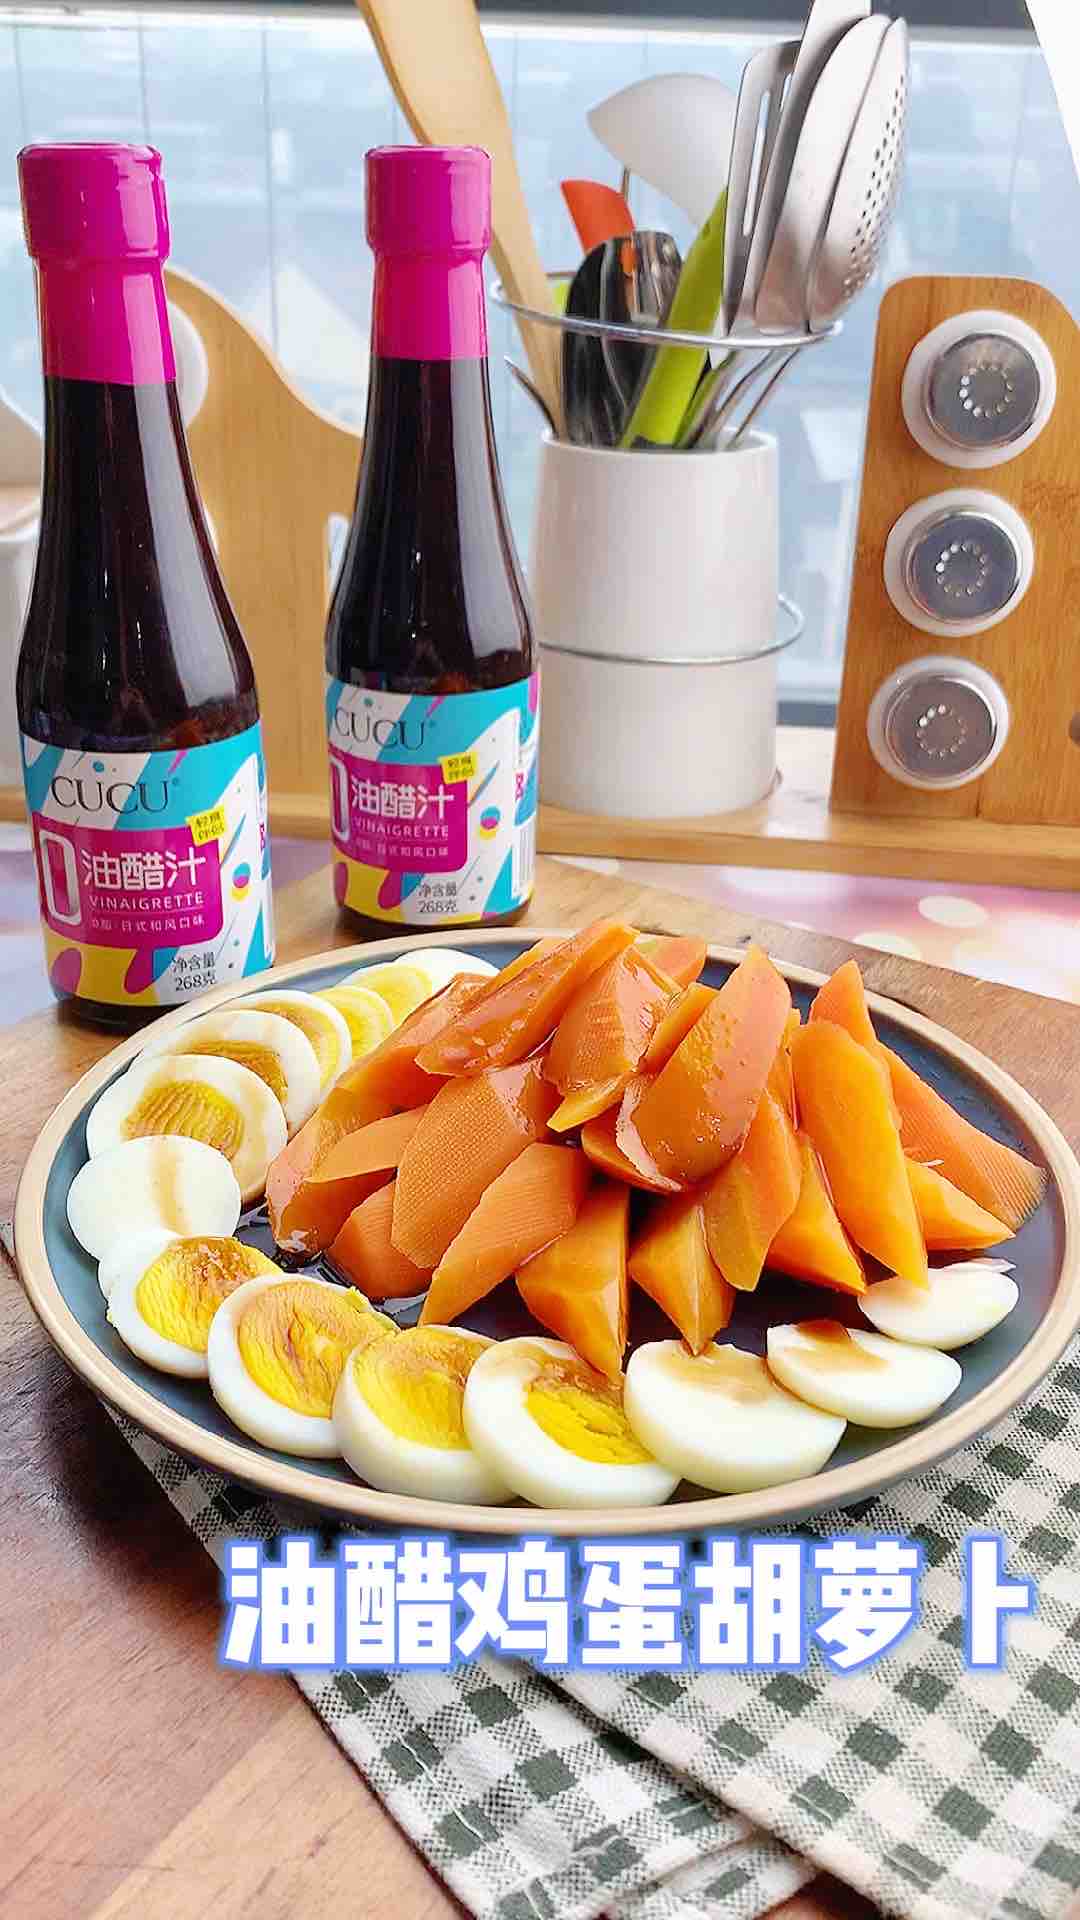 Eggs and Carrots in Oil and Vinegar recipe